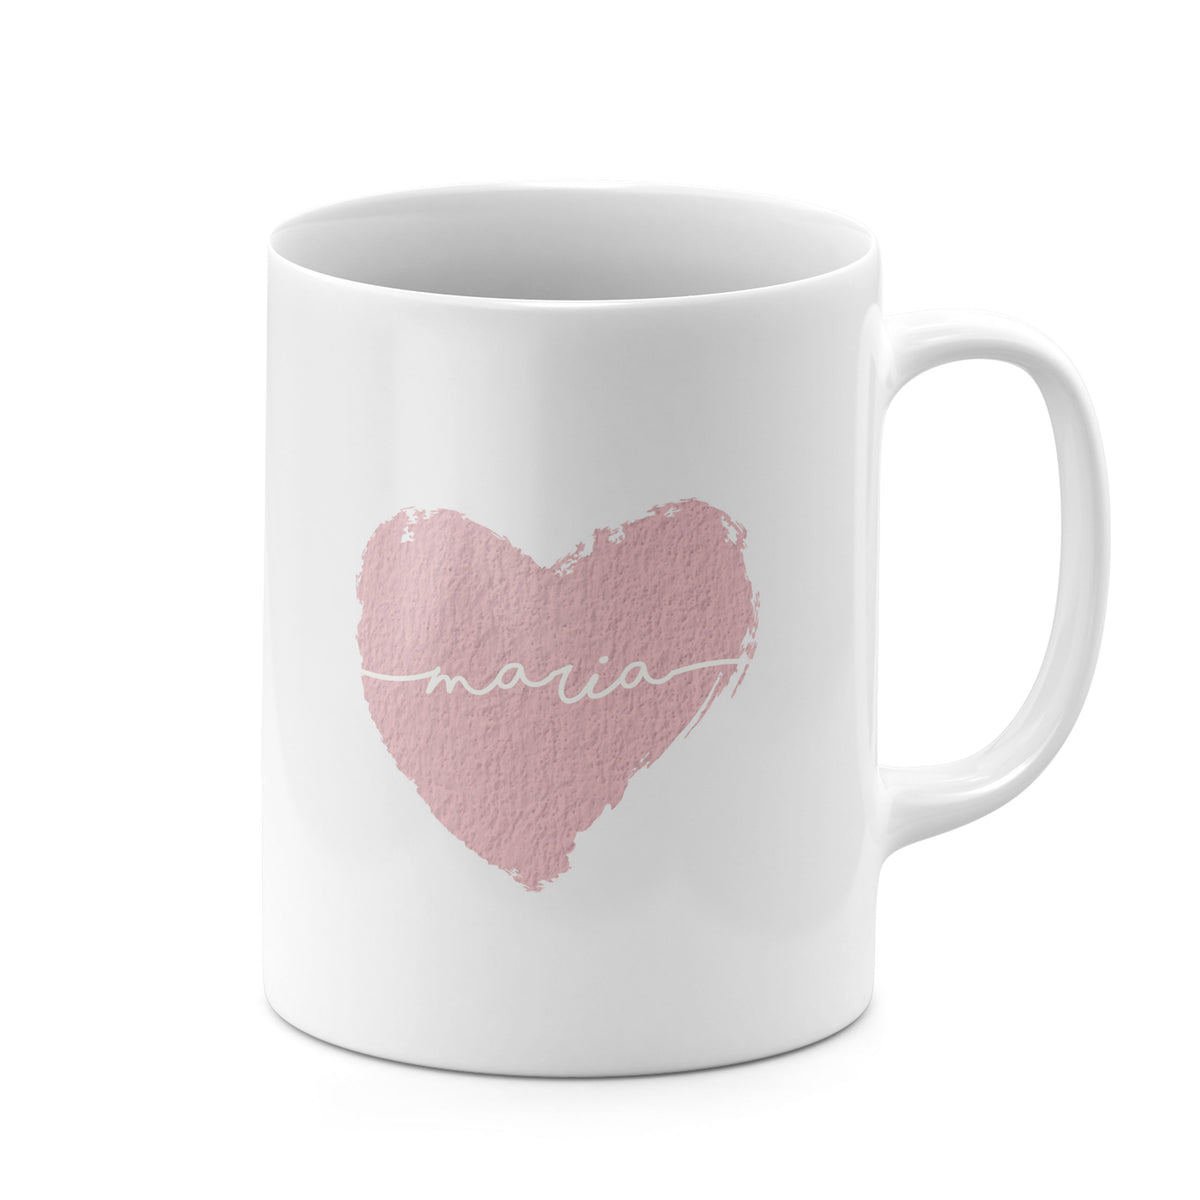 Personalised Ceramic Mug with Name Initials Text Grunge Pink Heart